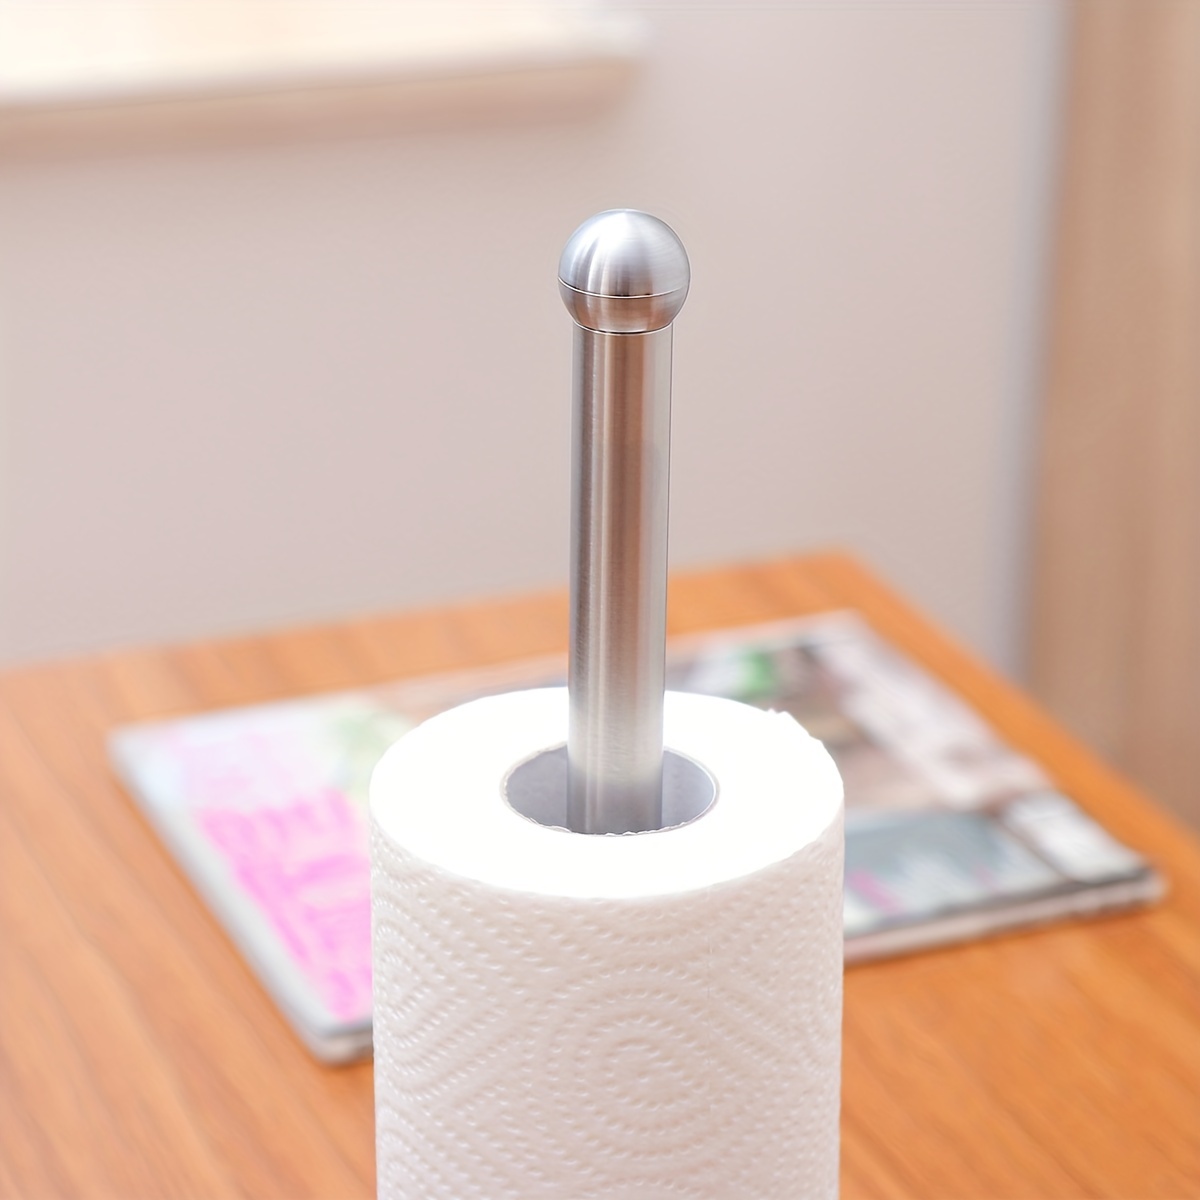 Vertical Roll Paper Holder, Household Stainless Steel Paper Towel